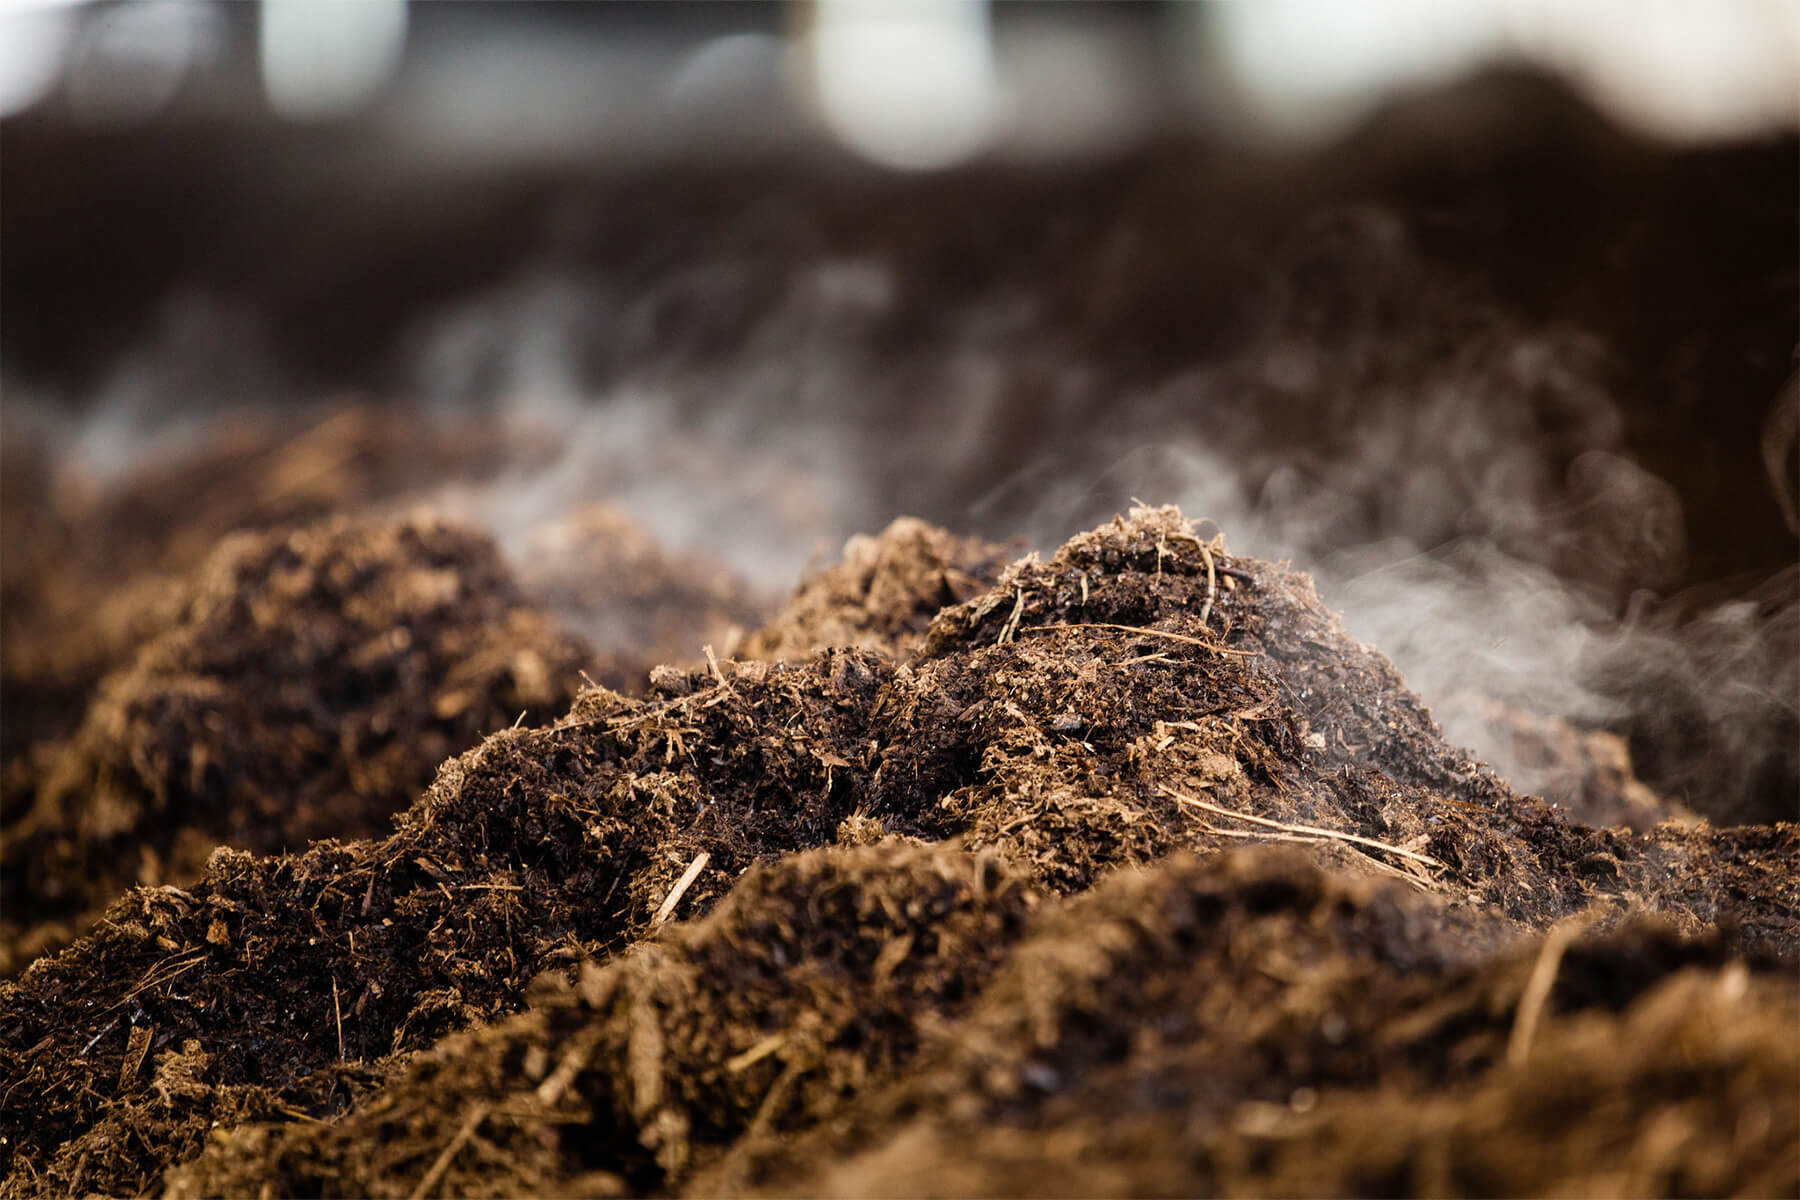 Steam rising from a pile of compost.